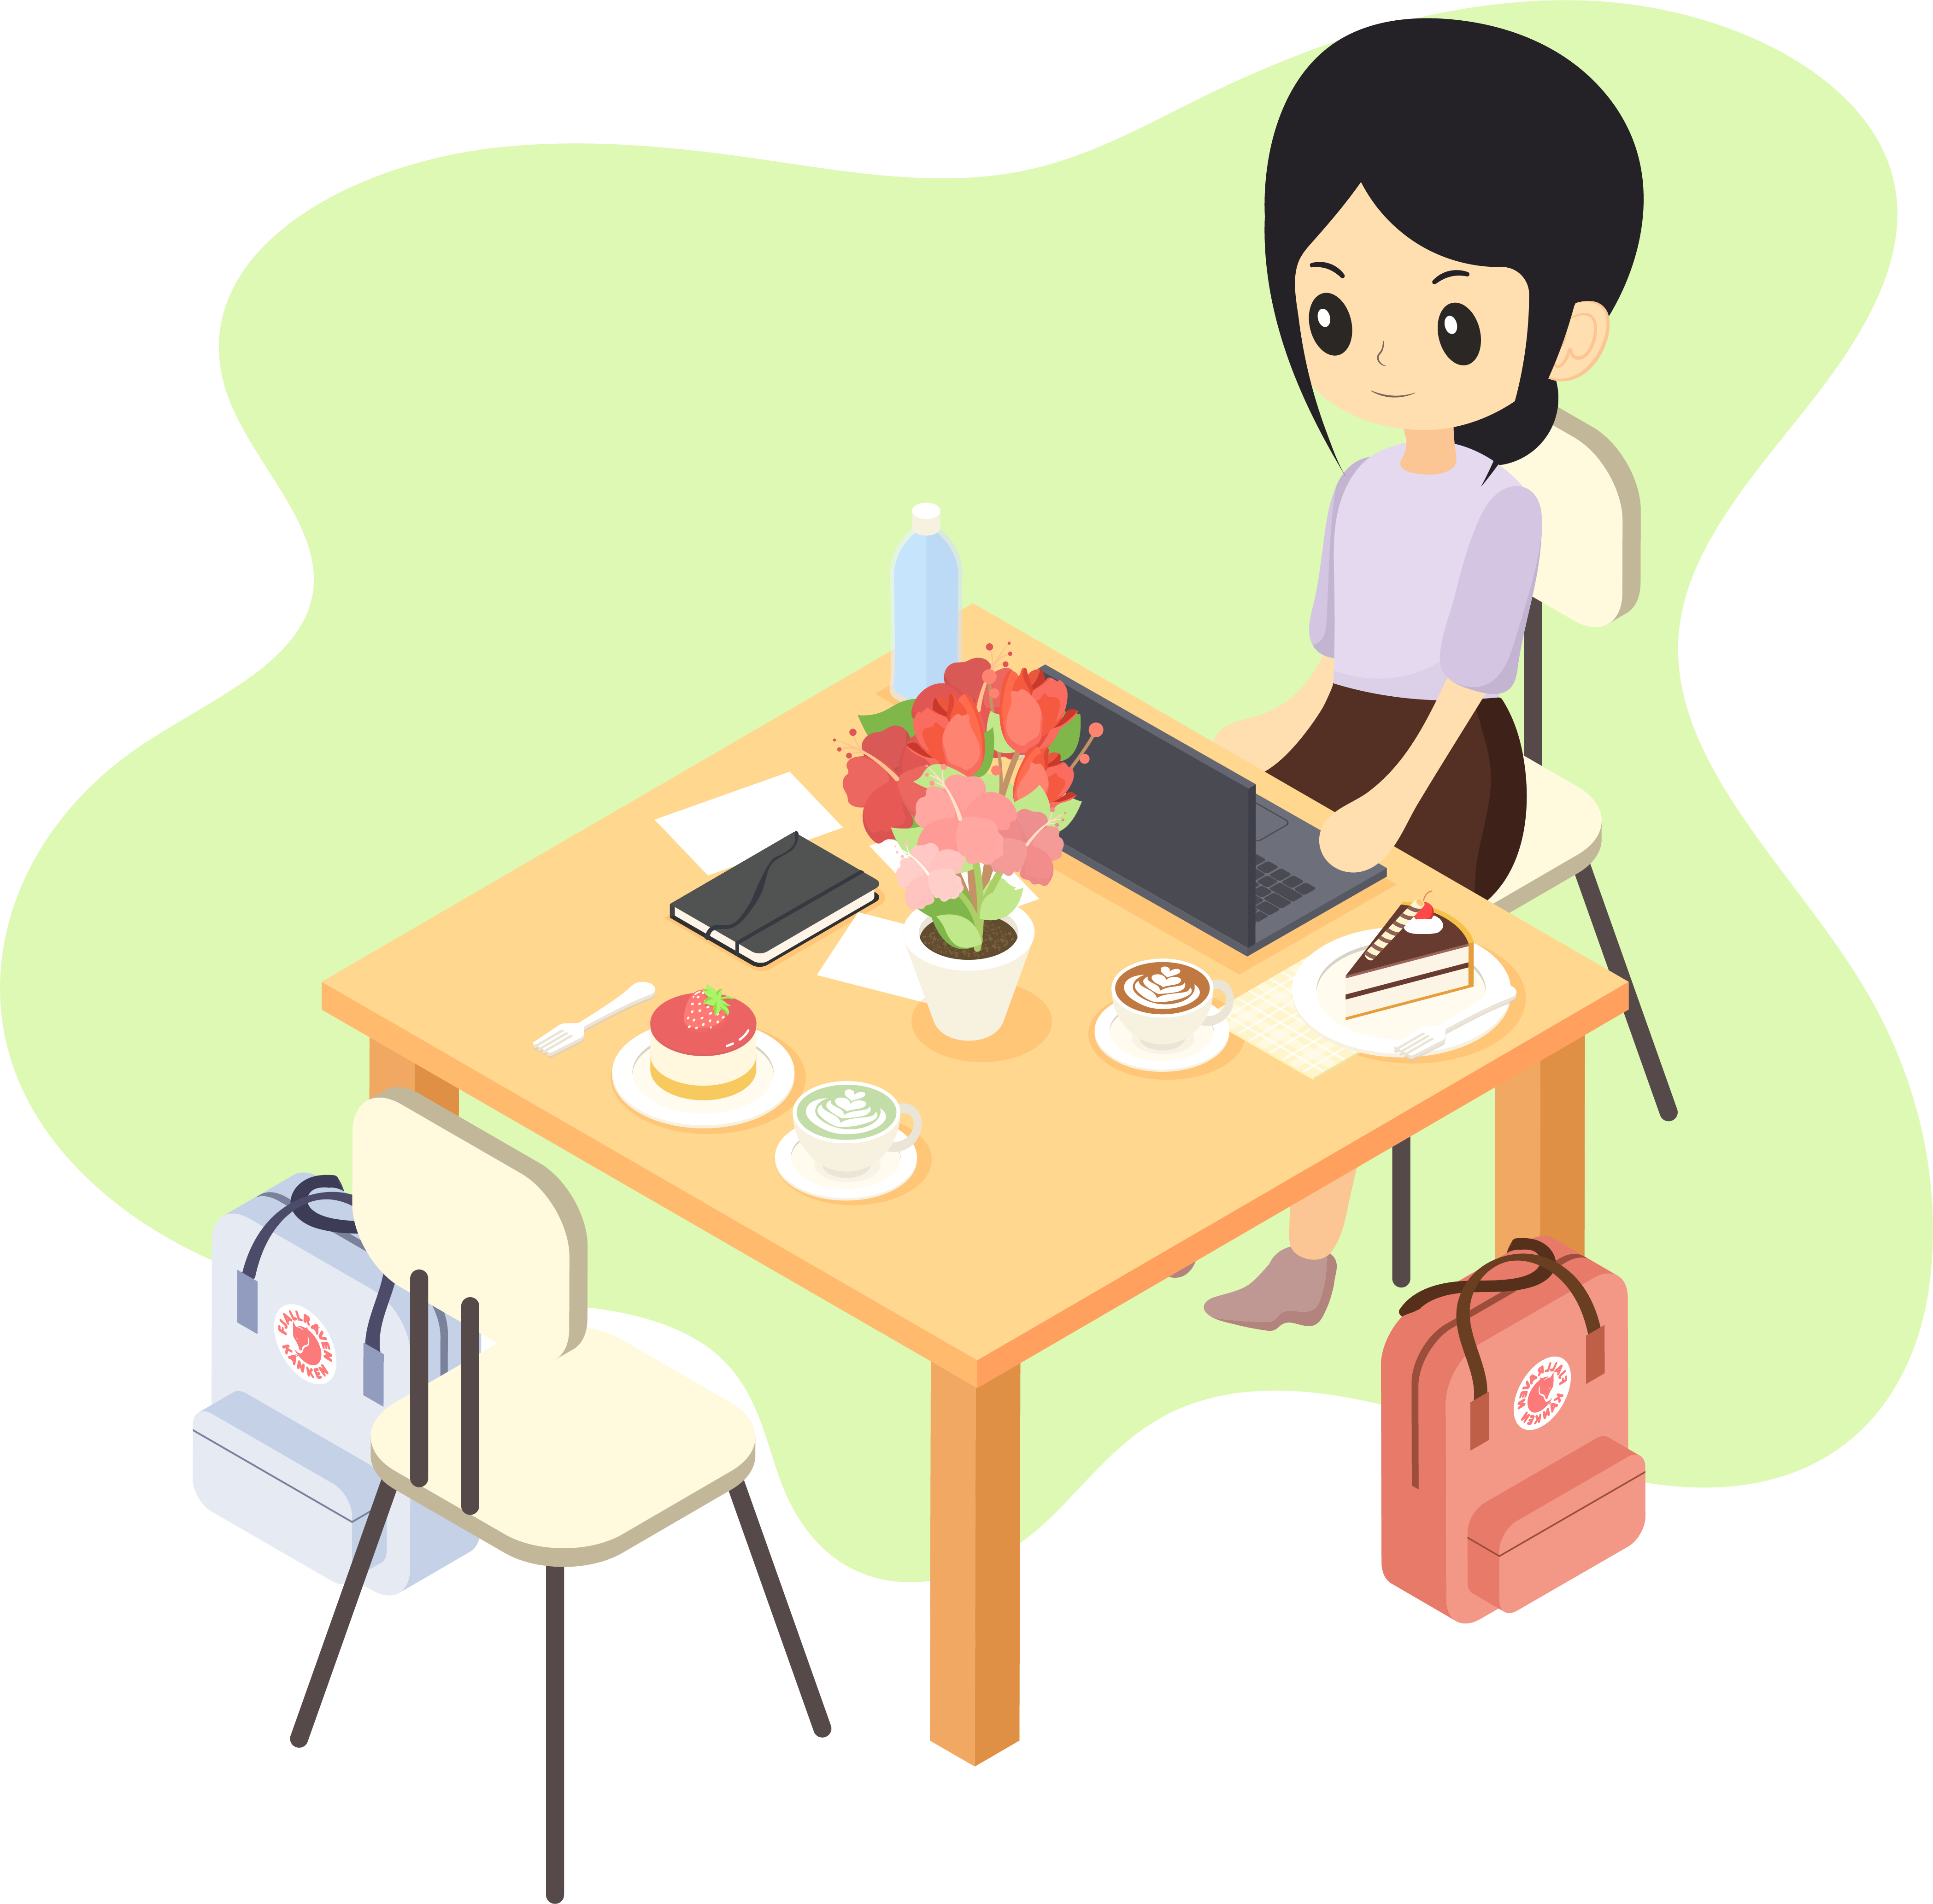 Cartoon drawing of a person sitting at a two-seater table at a cafe. They have their laptop, papers, and coffee scattered on the surface of the table.